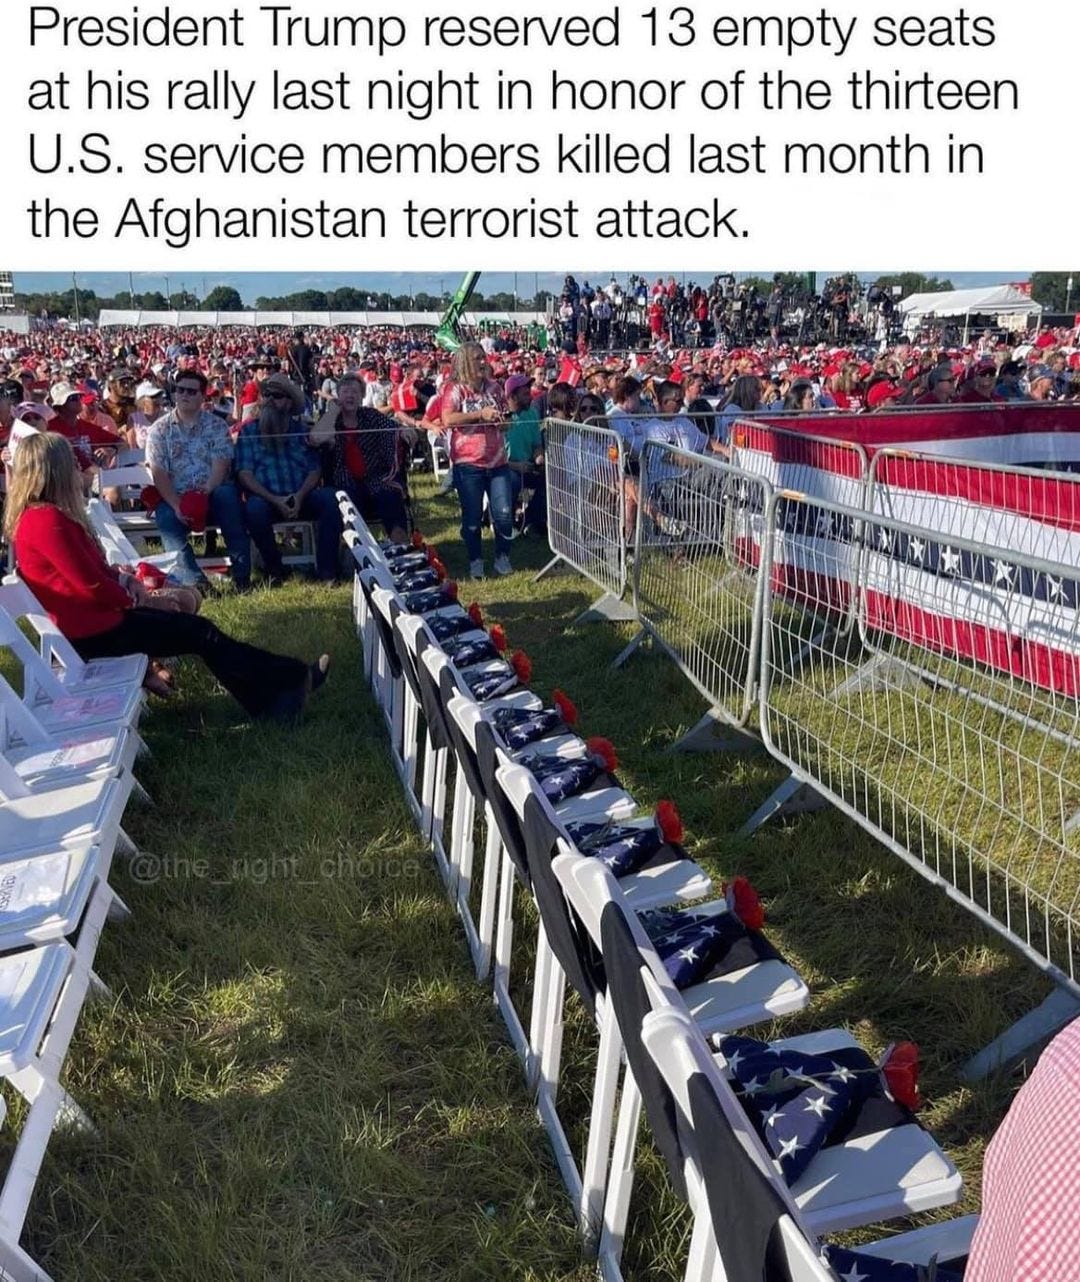 May be an image of outdoors and text that says 'President Trump reserved 13 empty seats at his rally last night in honor of the thirteen U.S. service members killed last month in the Afghanistan terrorist attack.'